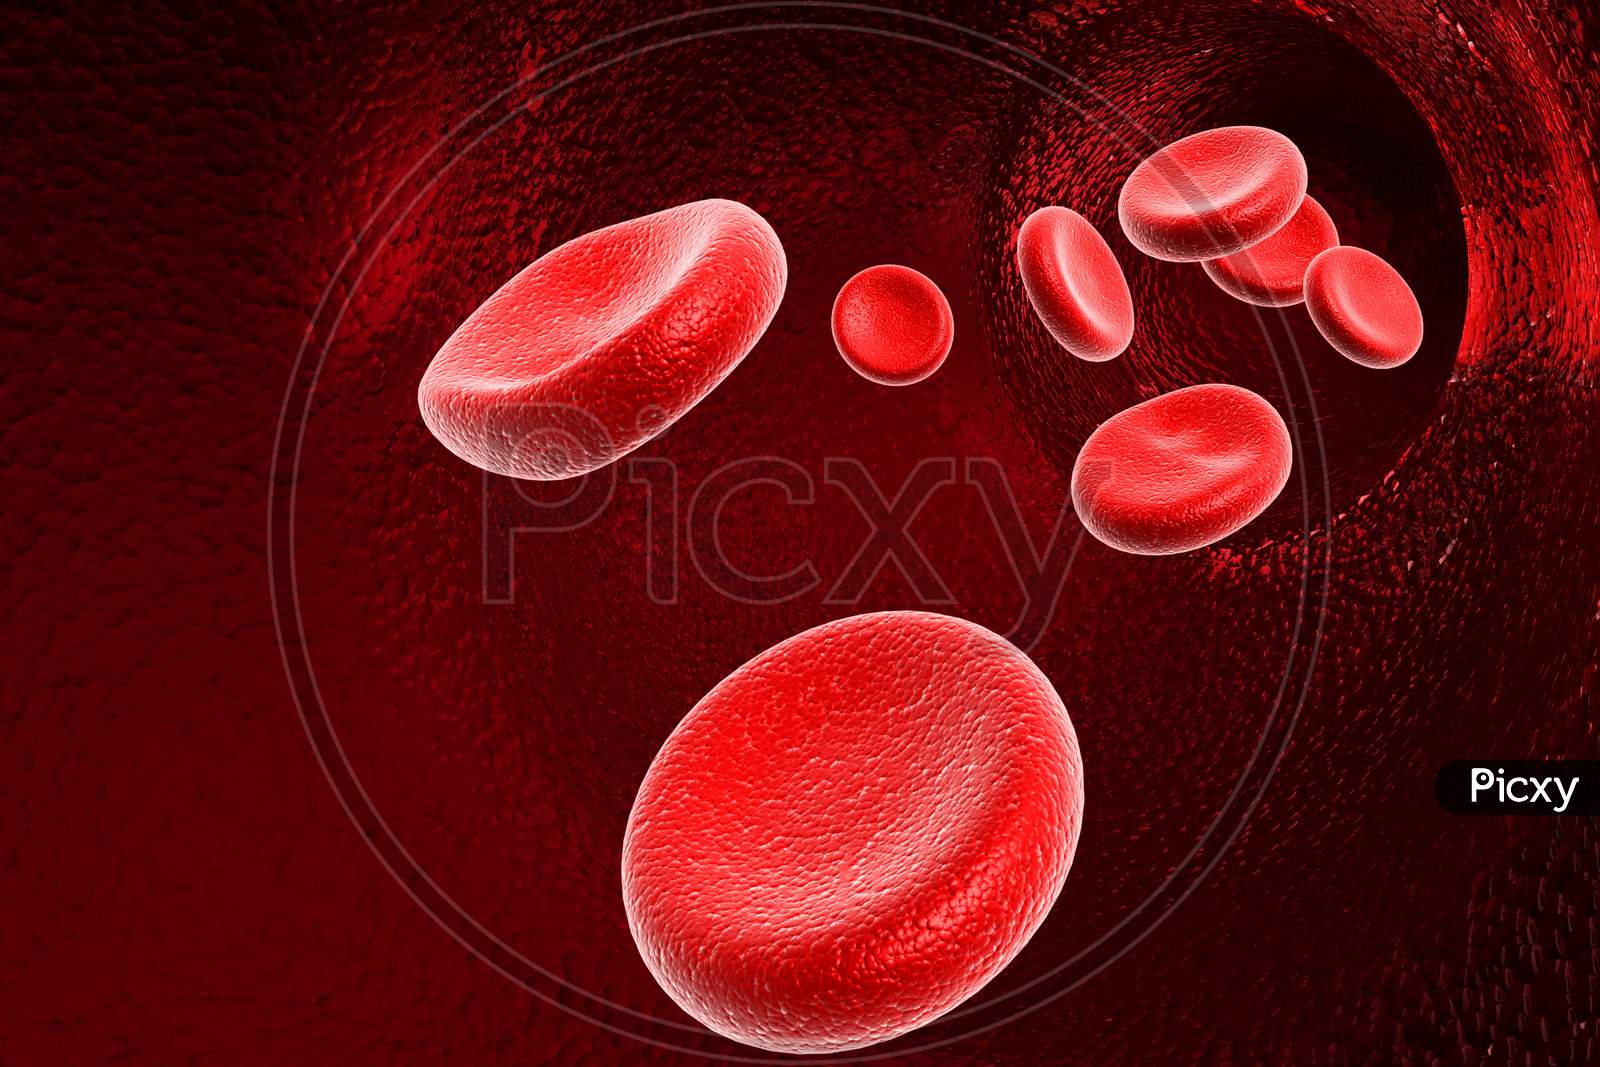 Blood Cell